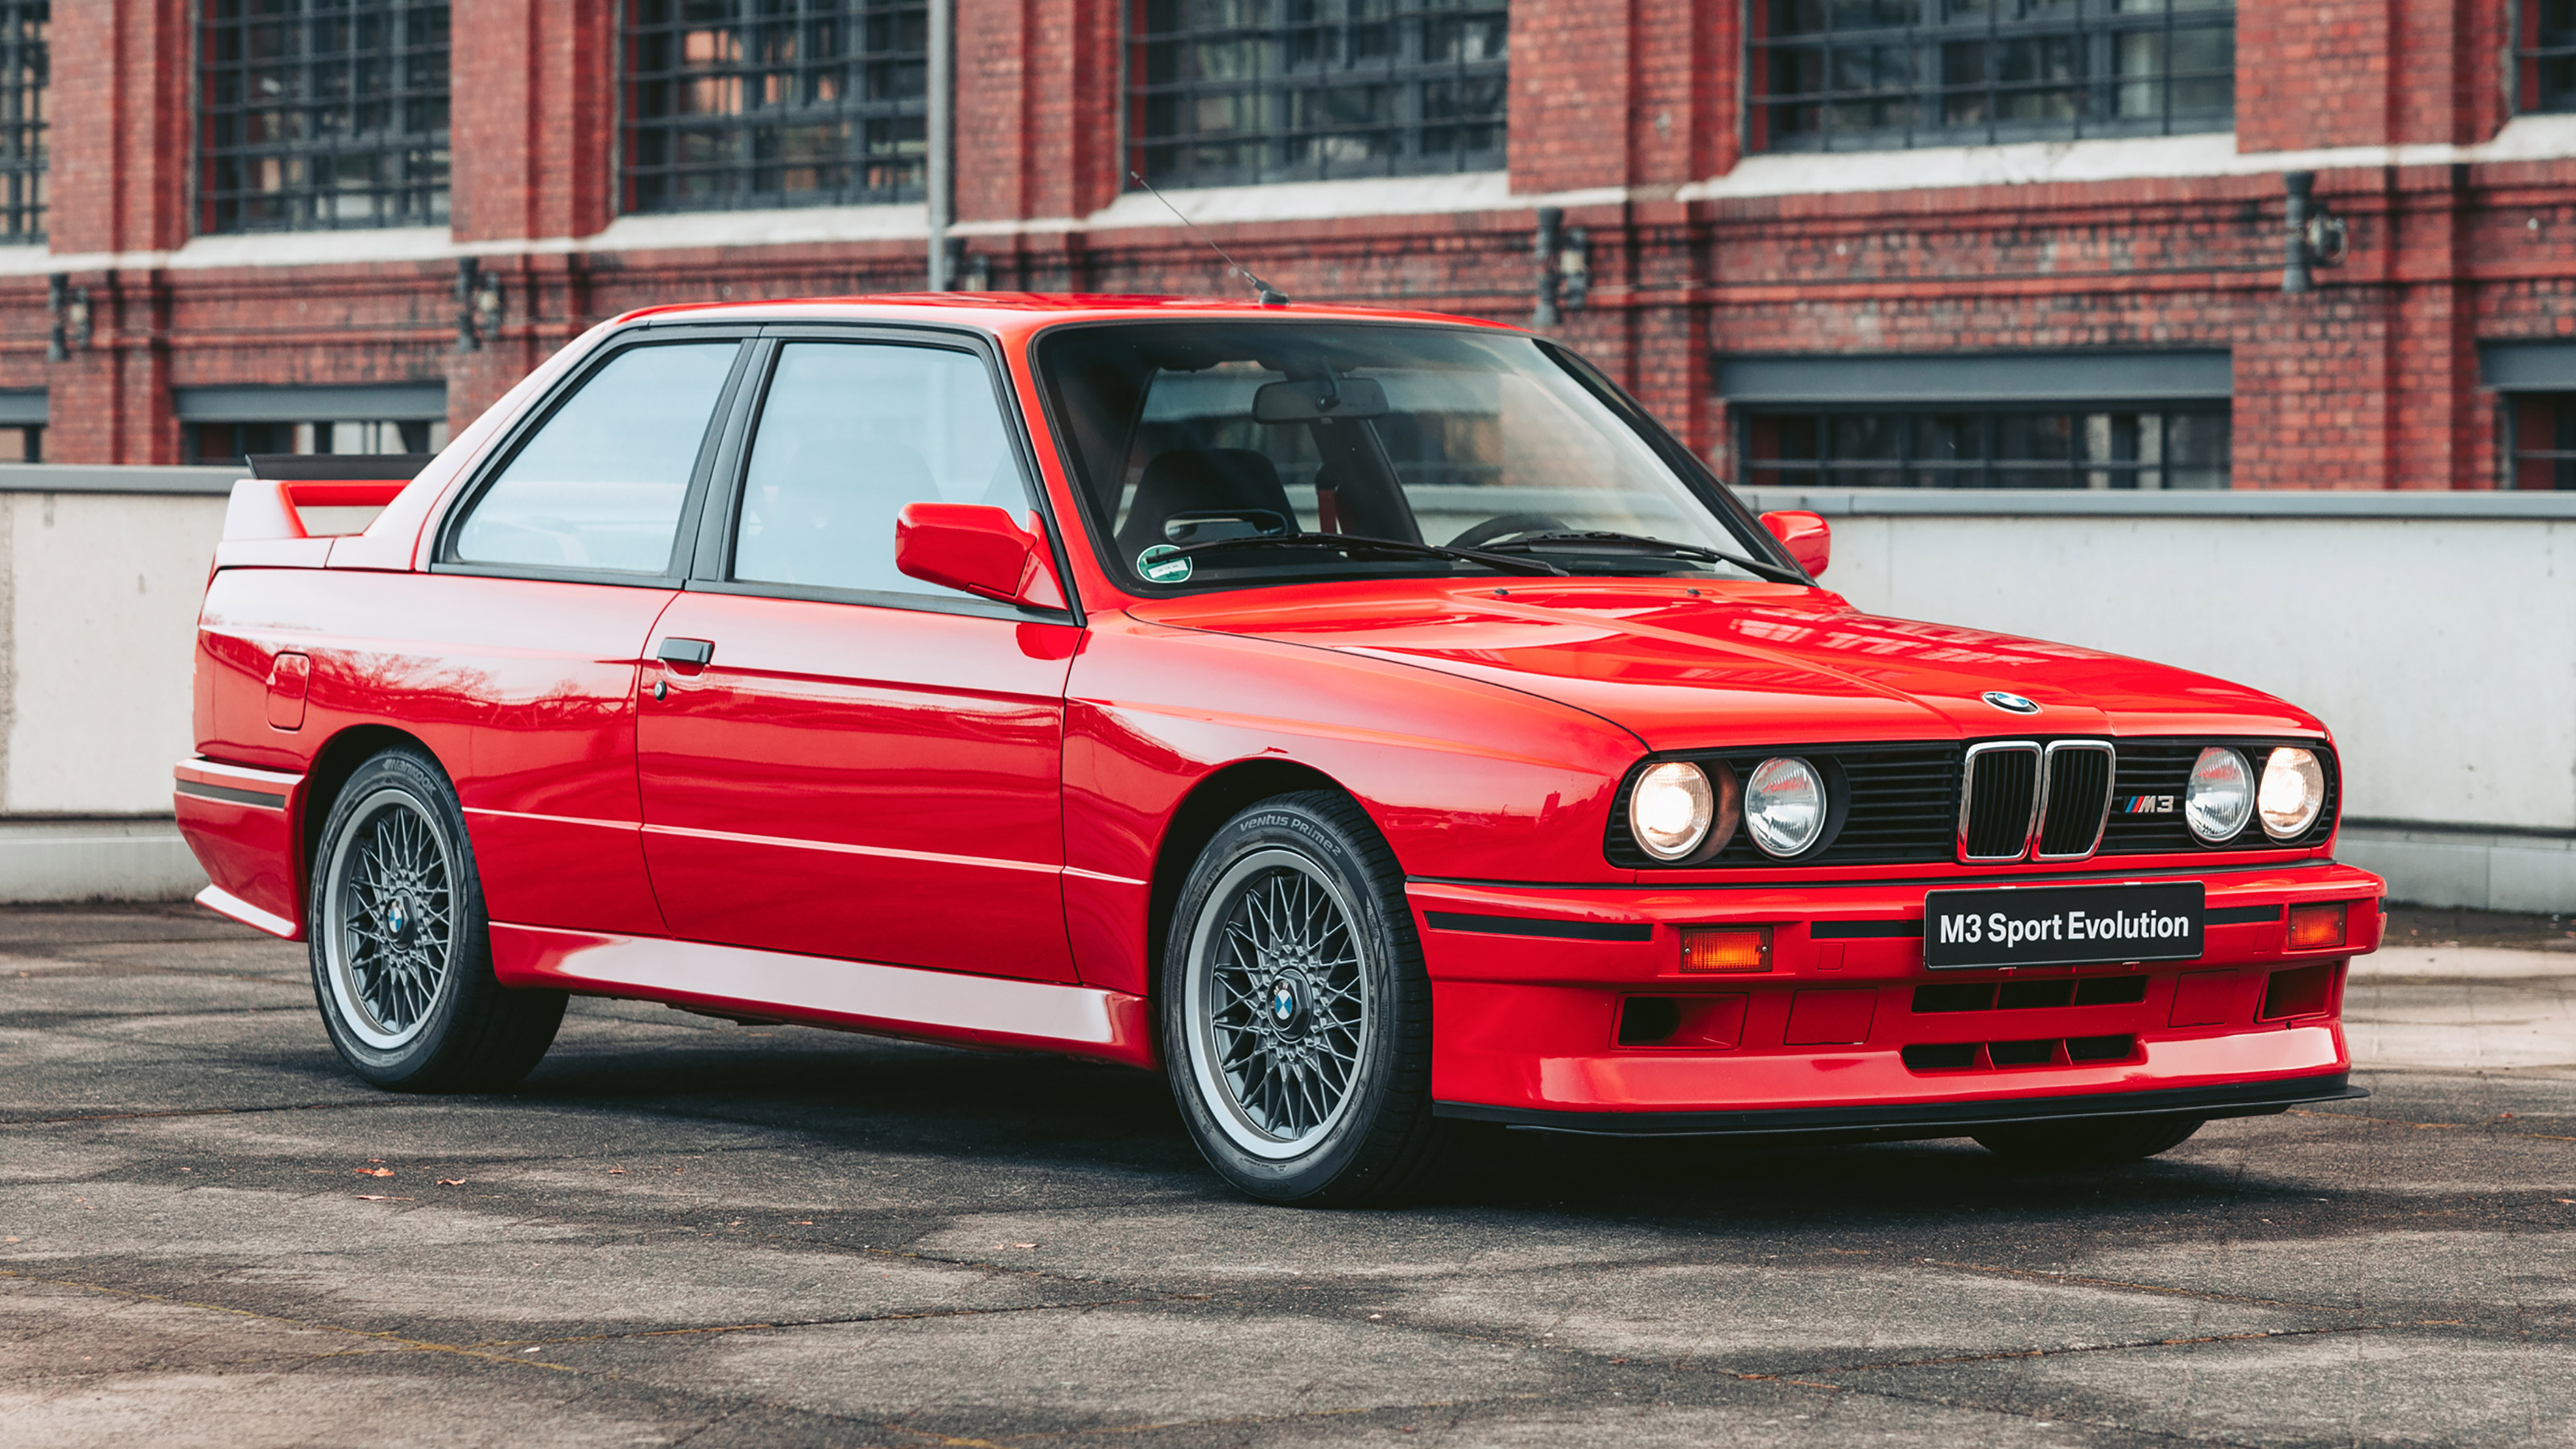 RM Sotheby's offering an ultimate BMW M collection